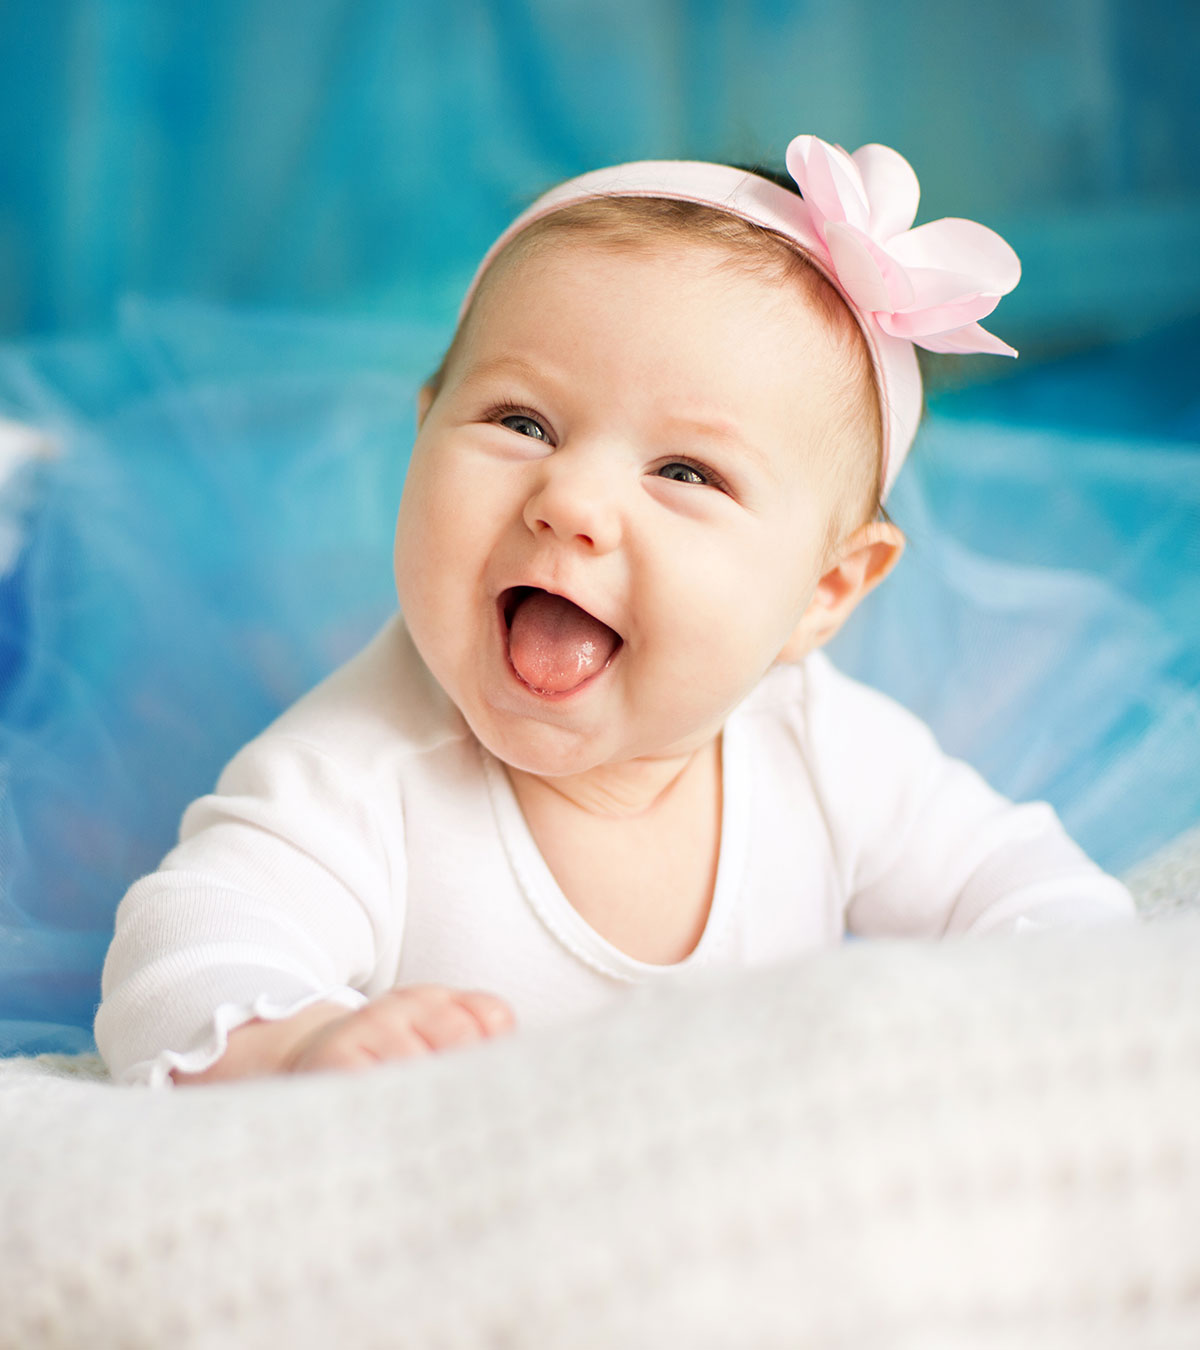 135 Baby Boy And Girl Names That Mean Happy Or Joy